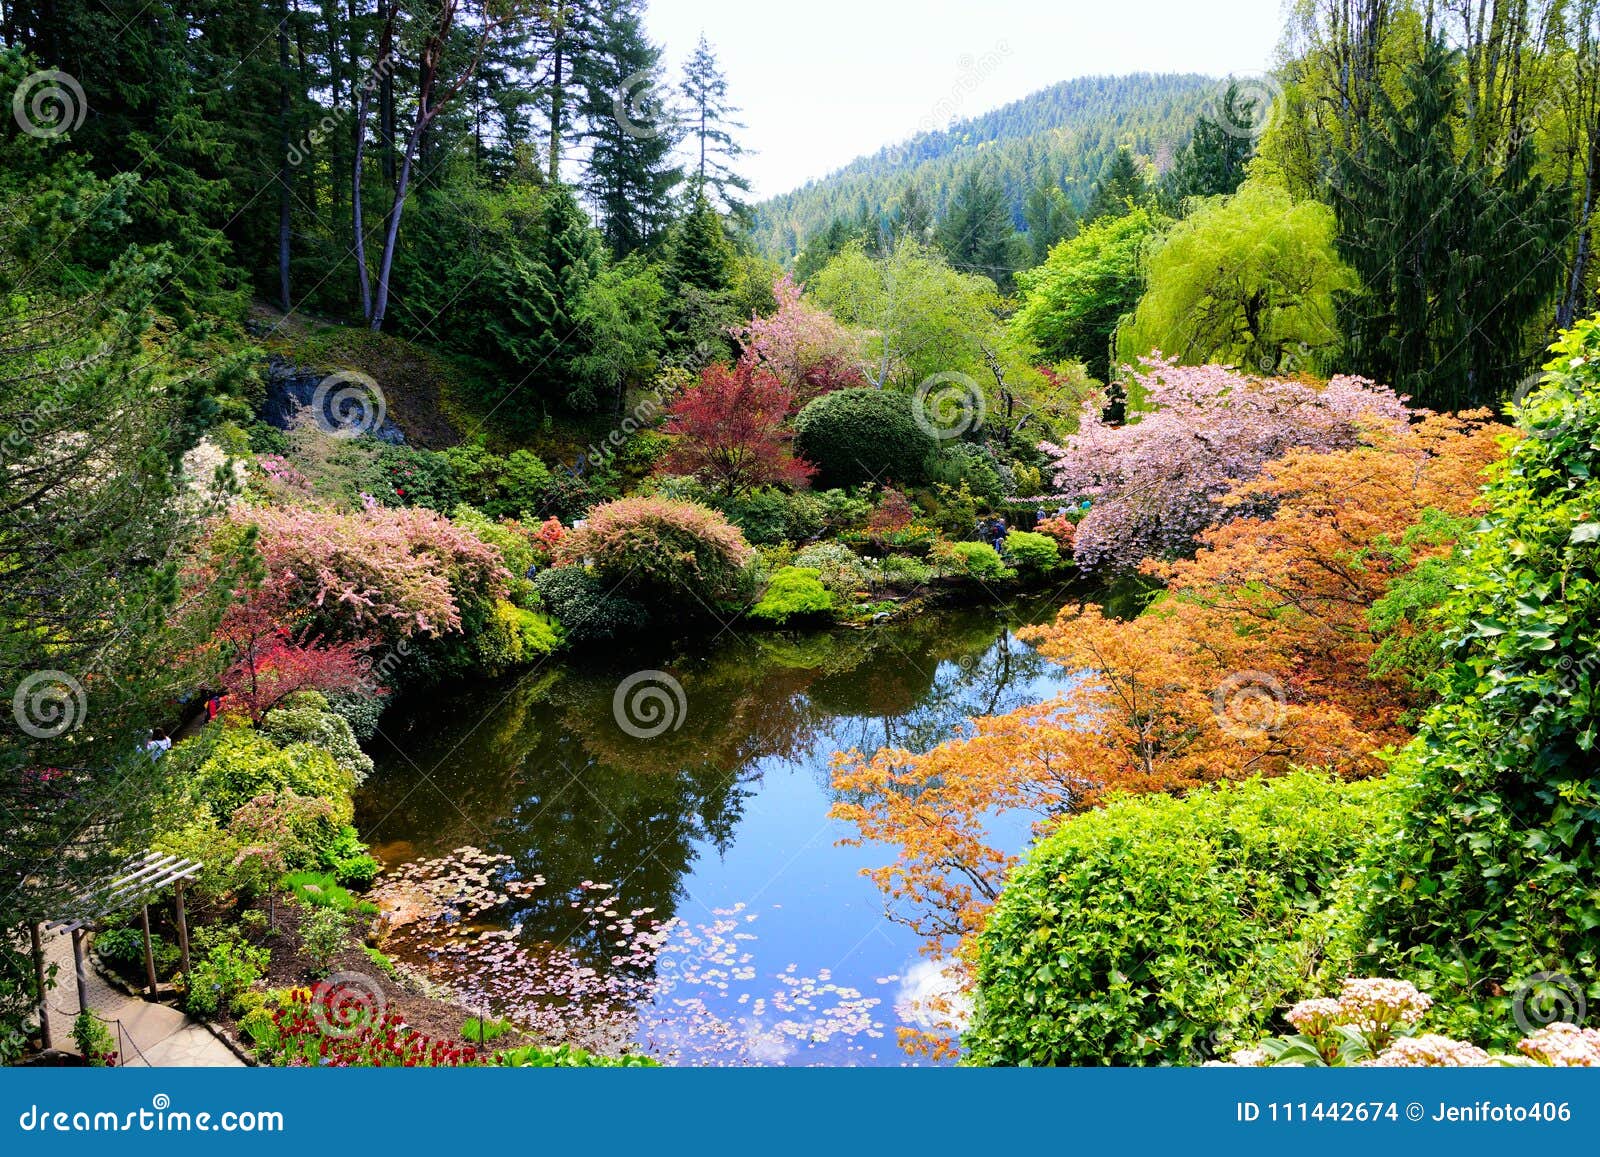 butchart gardens, victoria, canada, pond with vibrant spring flowers